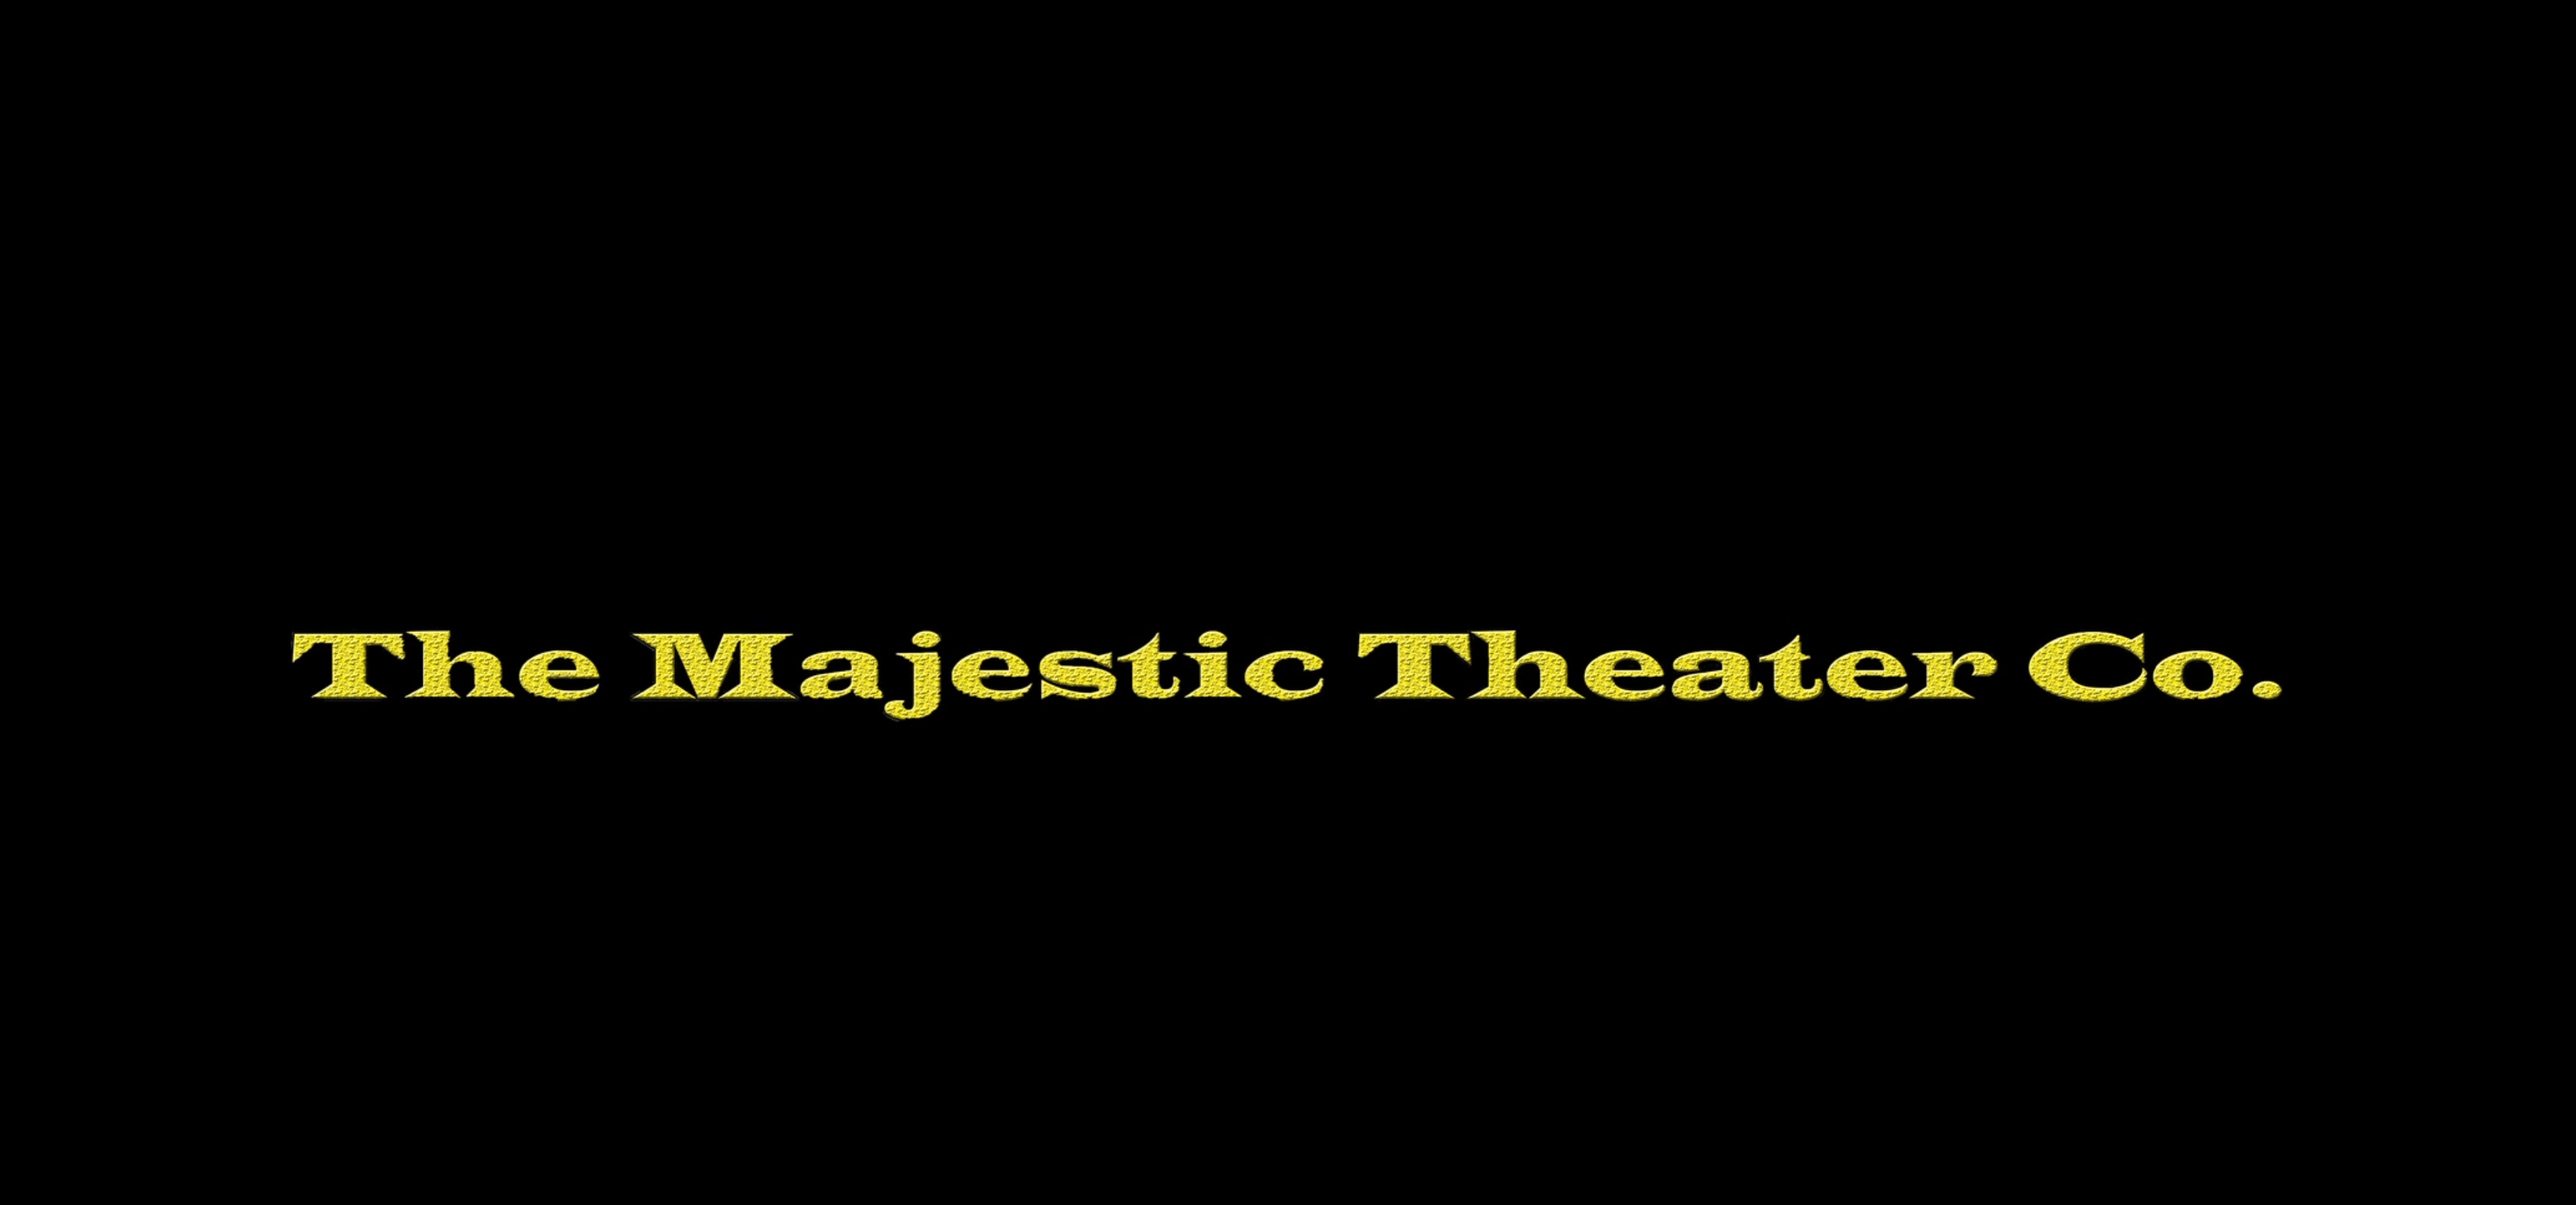 The Majestic Theater Co. Pilot Directed By Jeff Addiss